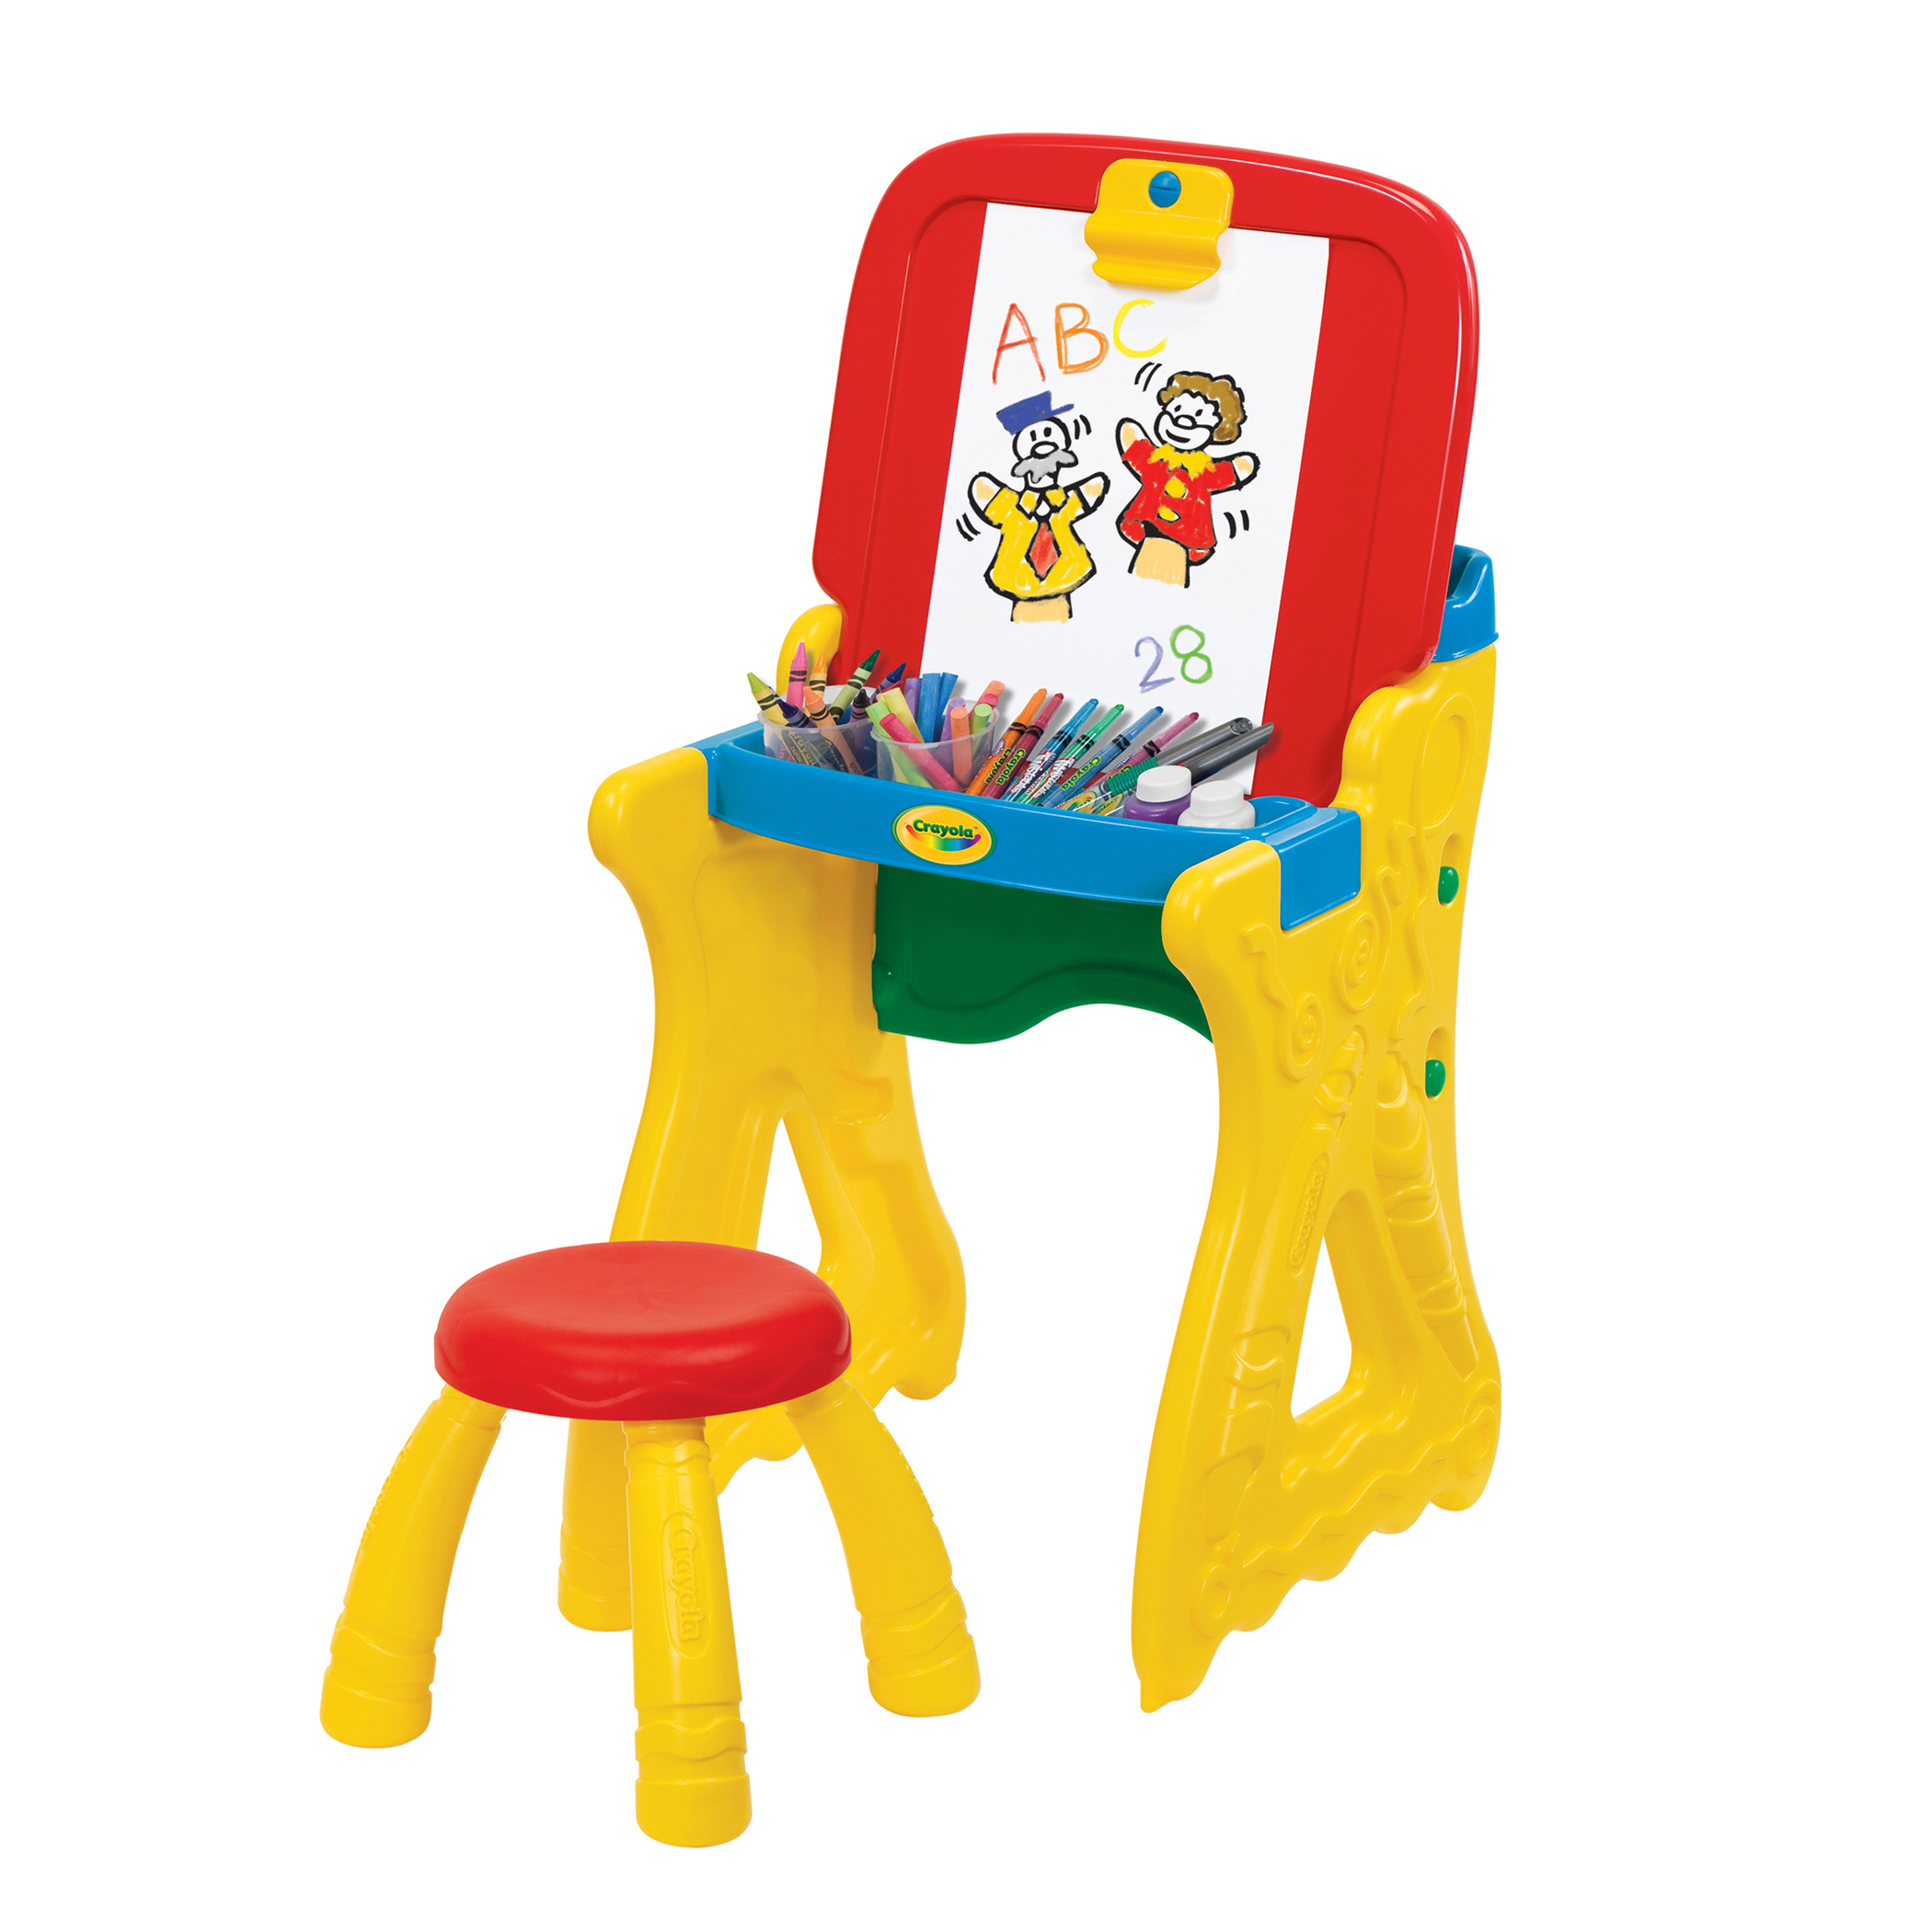 Crayola Play 'N Fold #5013 2-in-1 Art Studio Easel Desk – Recommended for Ages 3 Years and up - Multi in Color - image 1 of 12